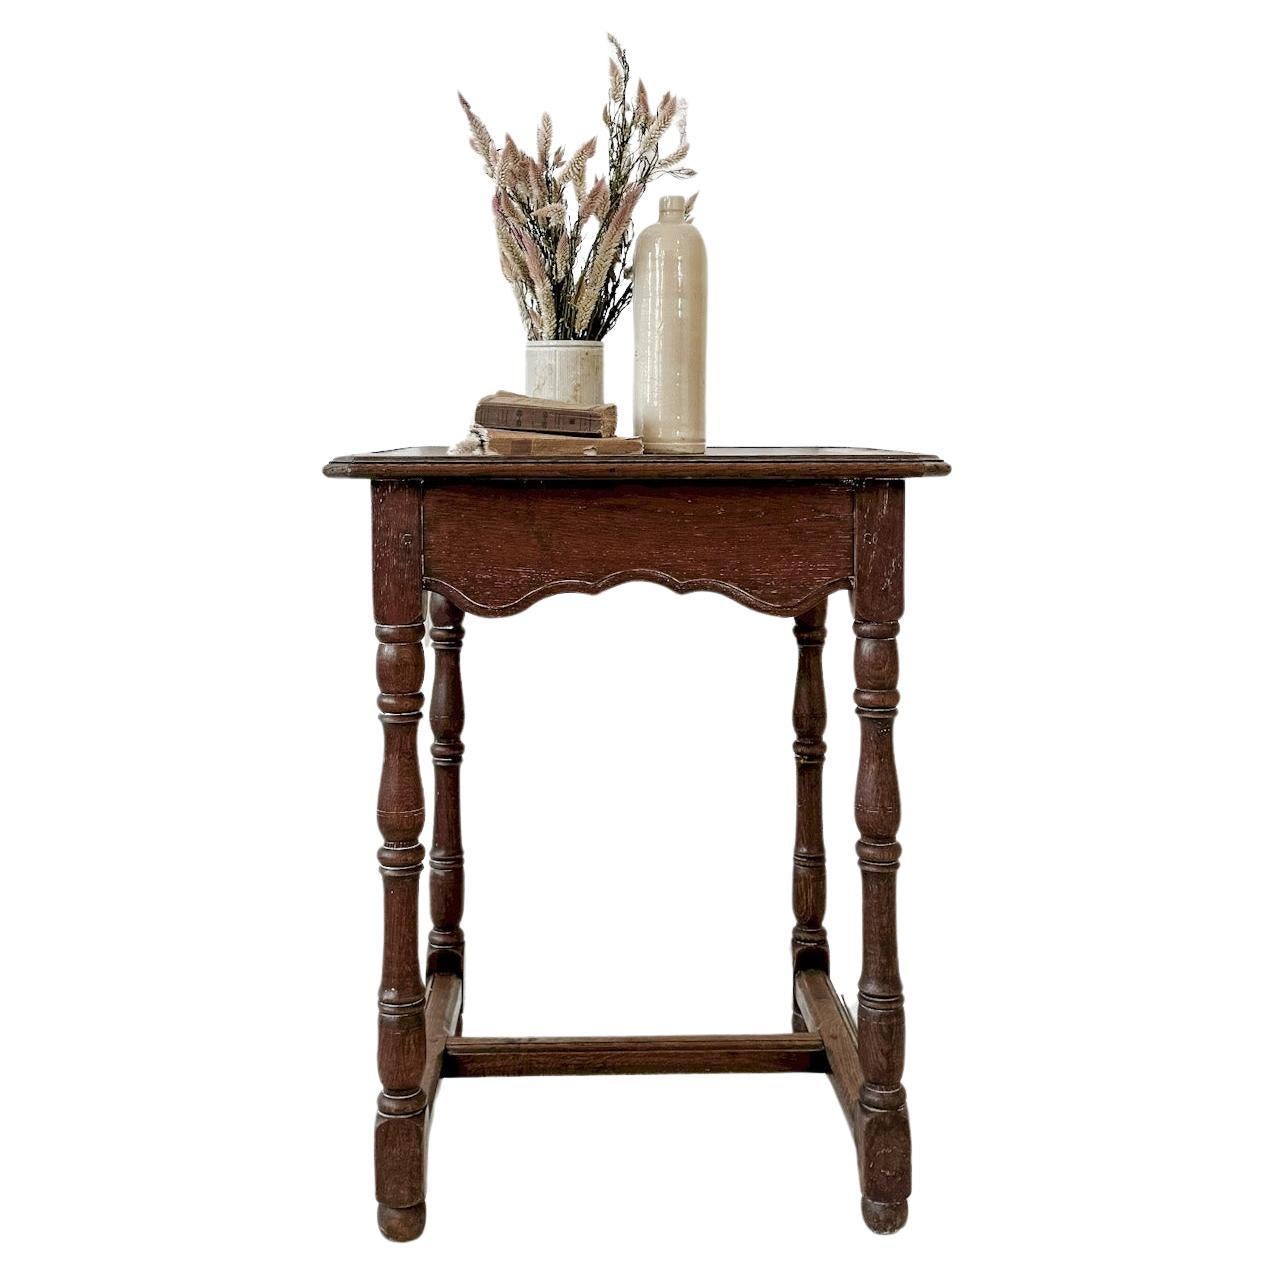 19th Century English Trestle Base Accent Table with Dark Stain